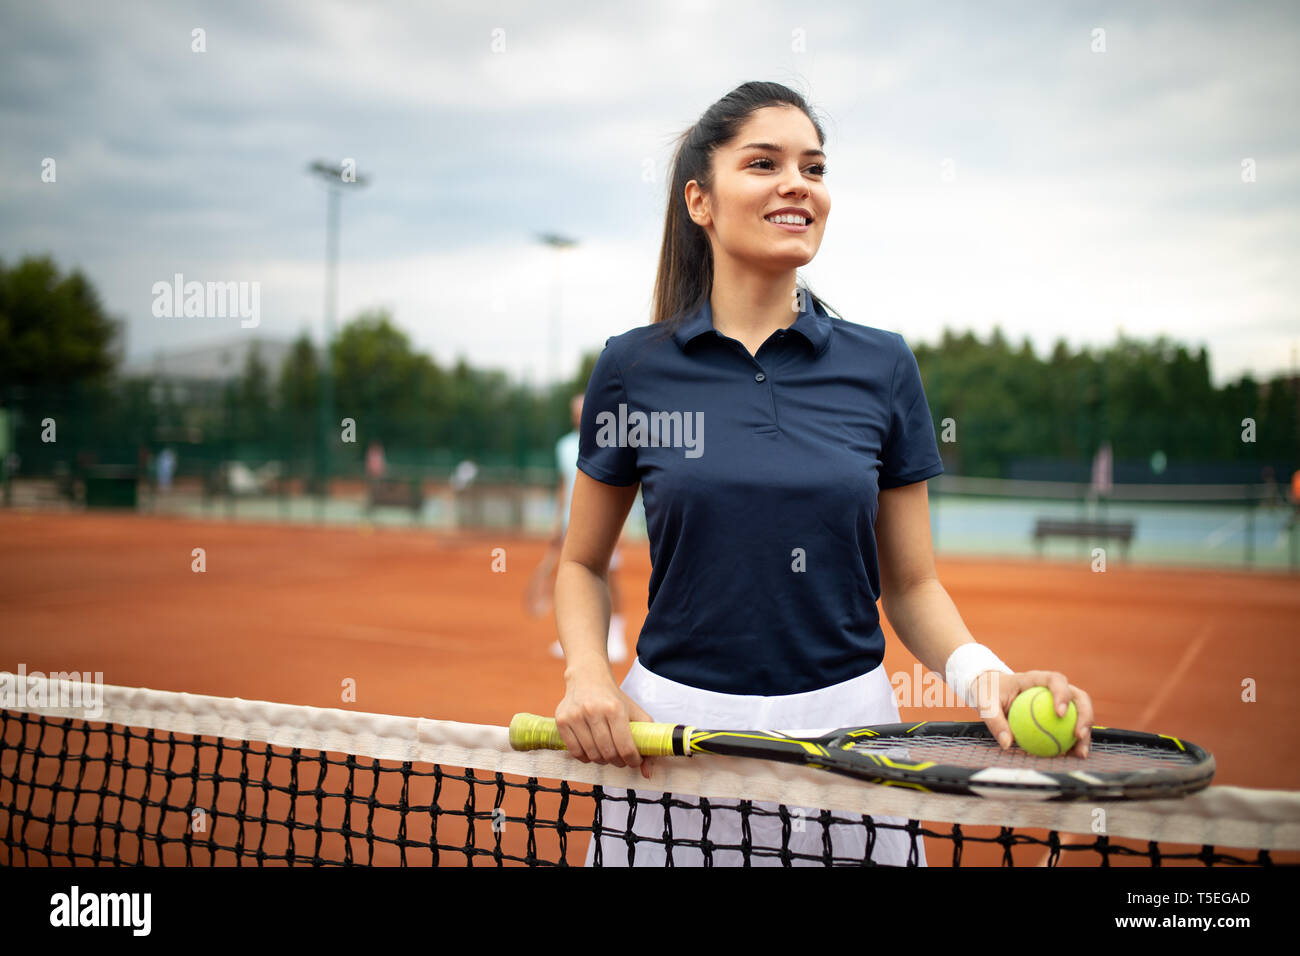 Happy fit girl playing tennis together. Sport concept Stock Photo